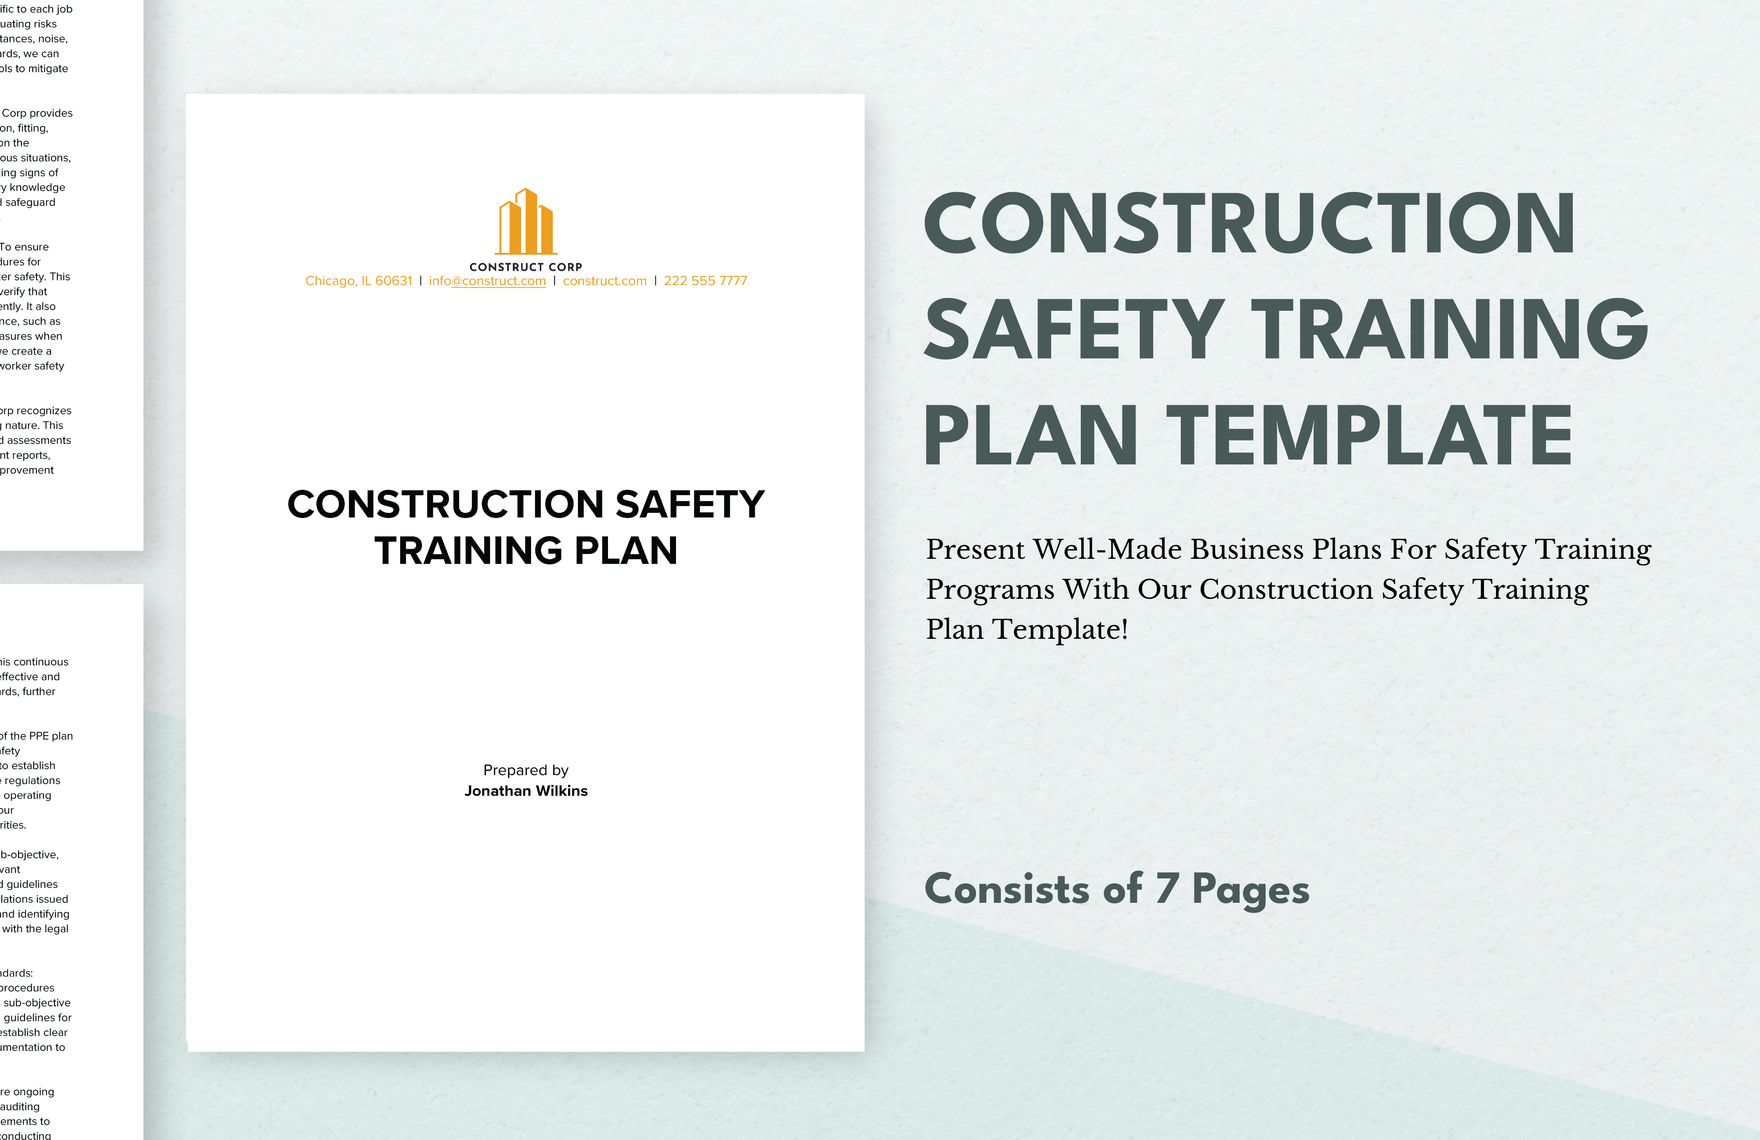 Construction Safety Training Plan Template